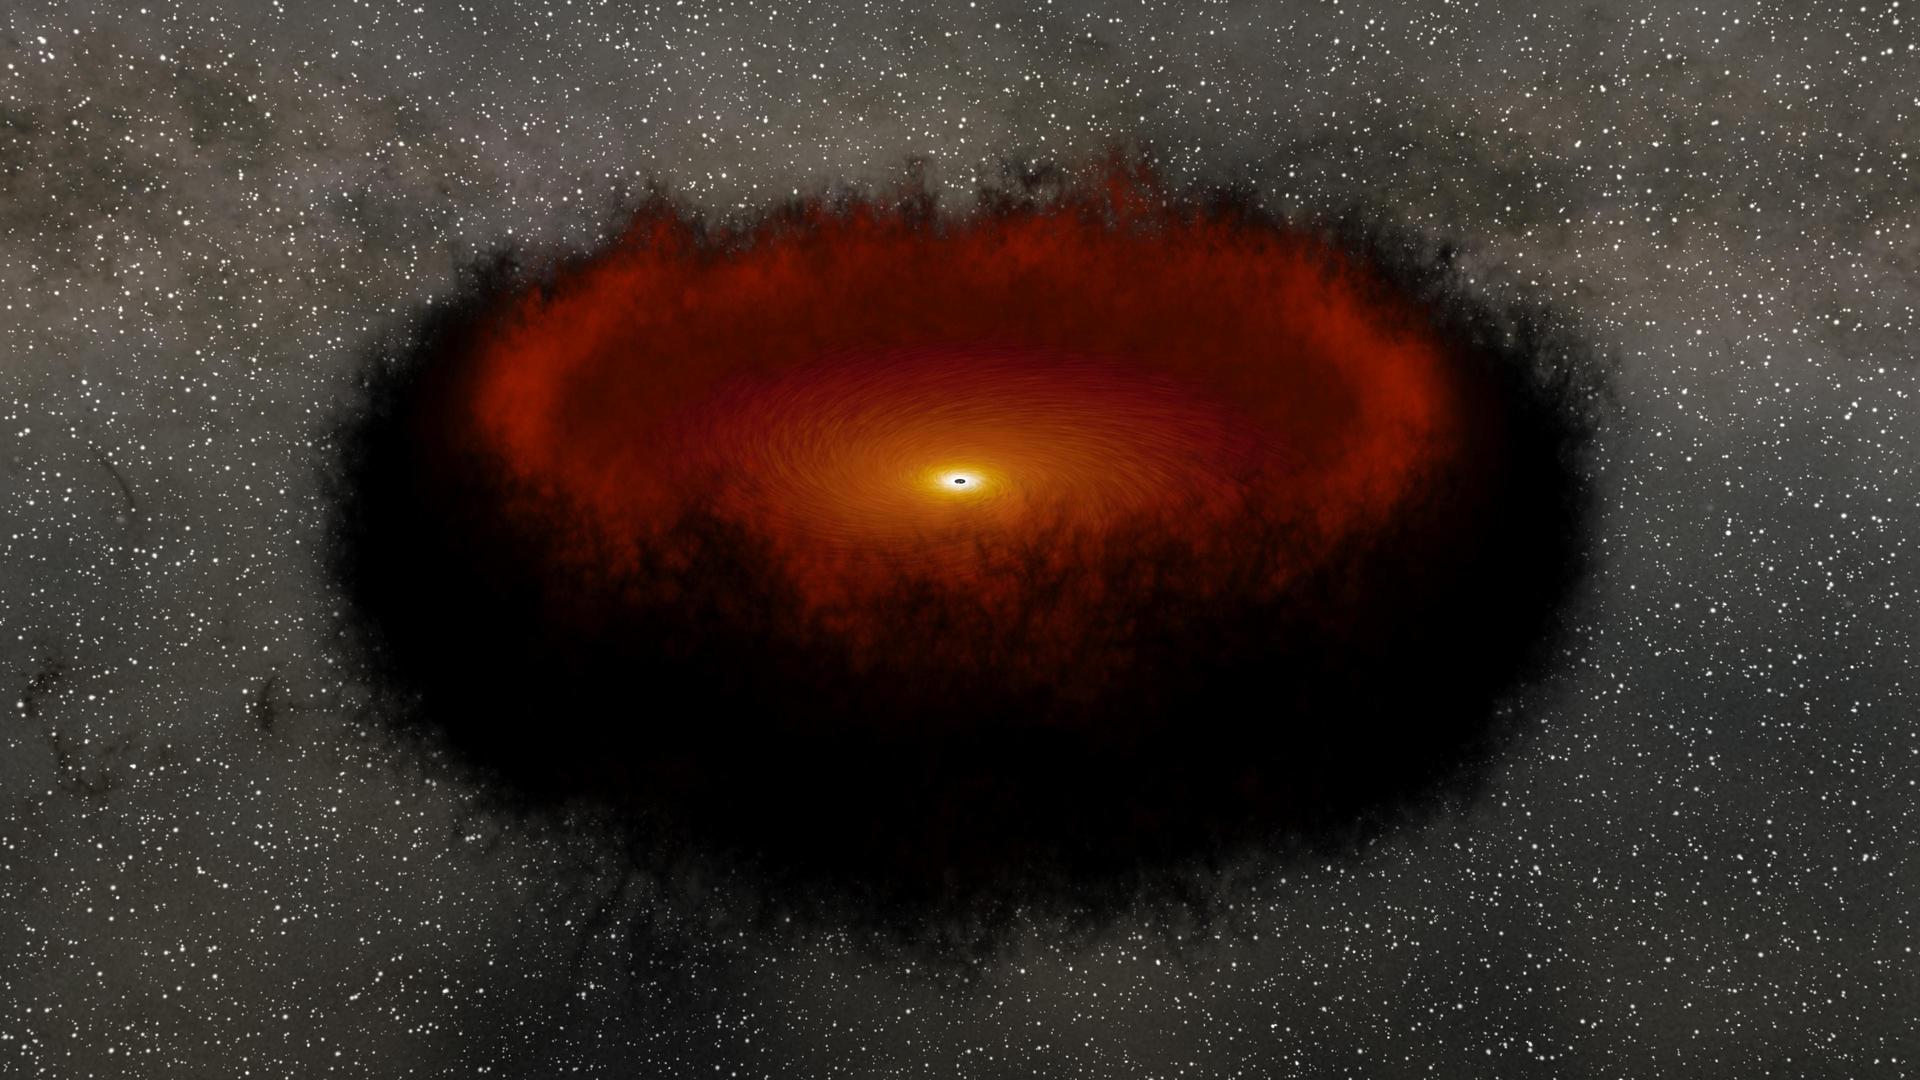 A disk of hot material around a supermassive black hole emits a burst of visible light, which travels out to a ring of dust that subsequently emits infrared light.